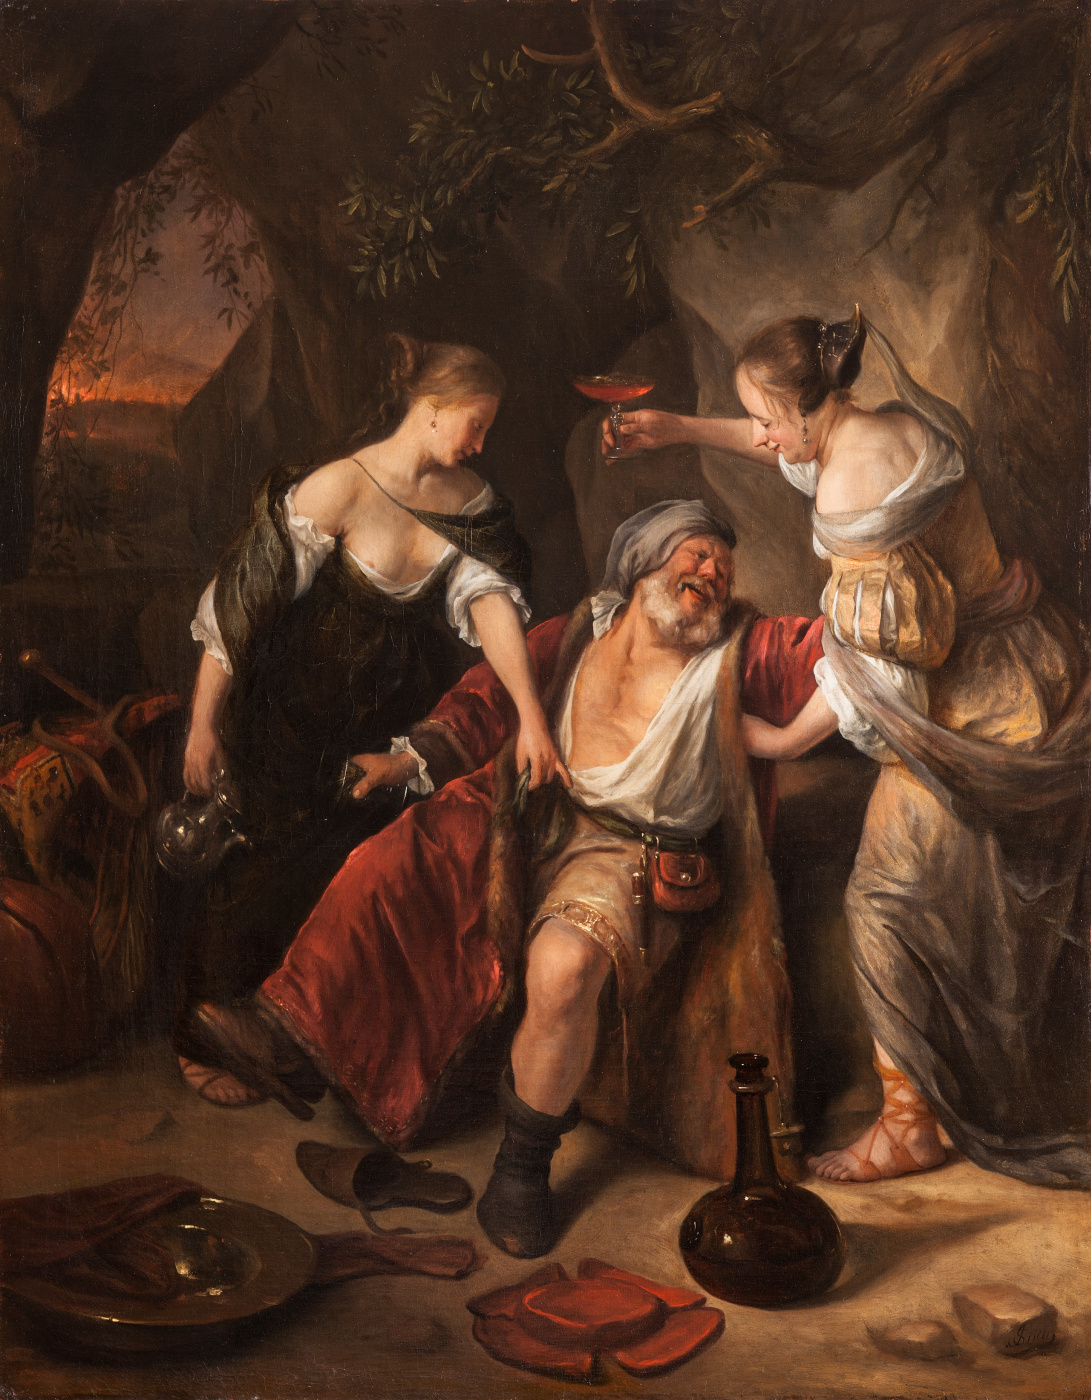 Jan Steen. Lot and his daughters